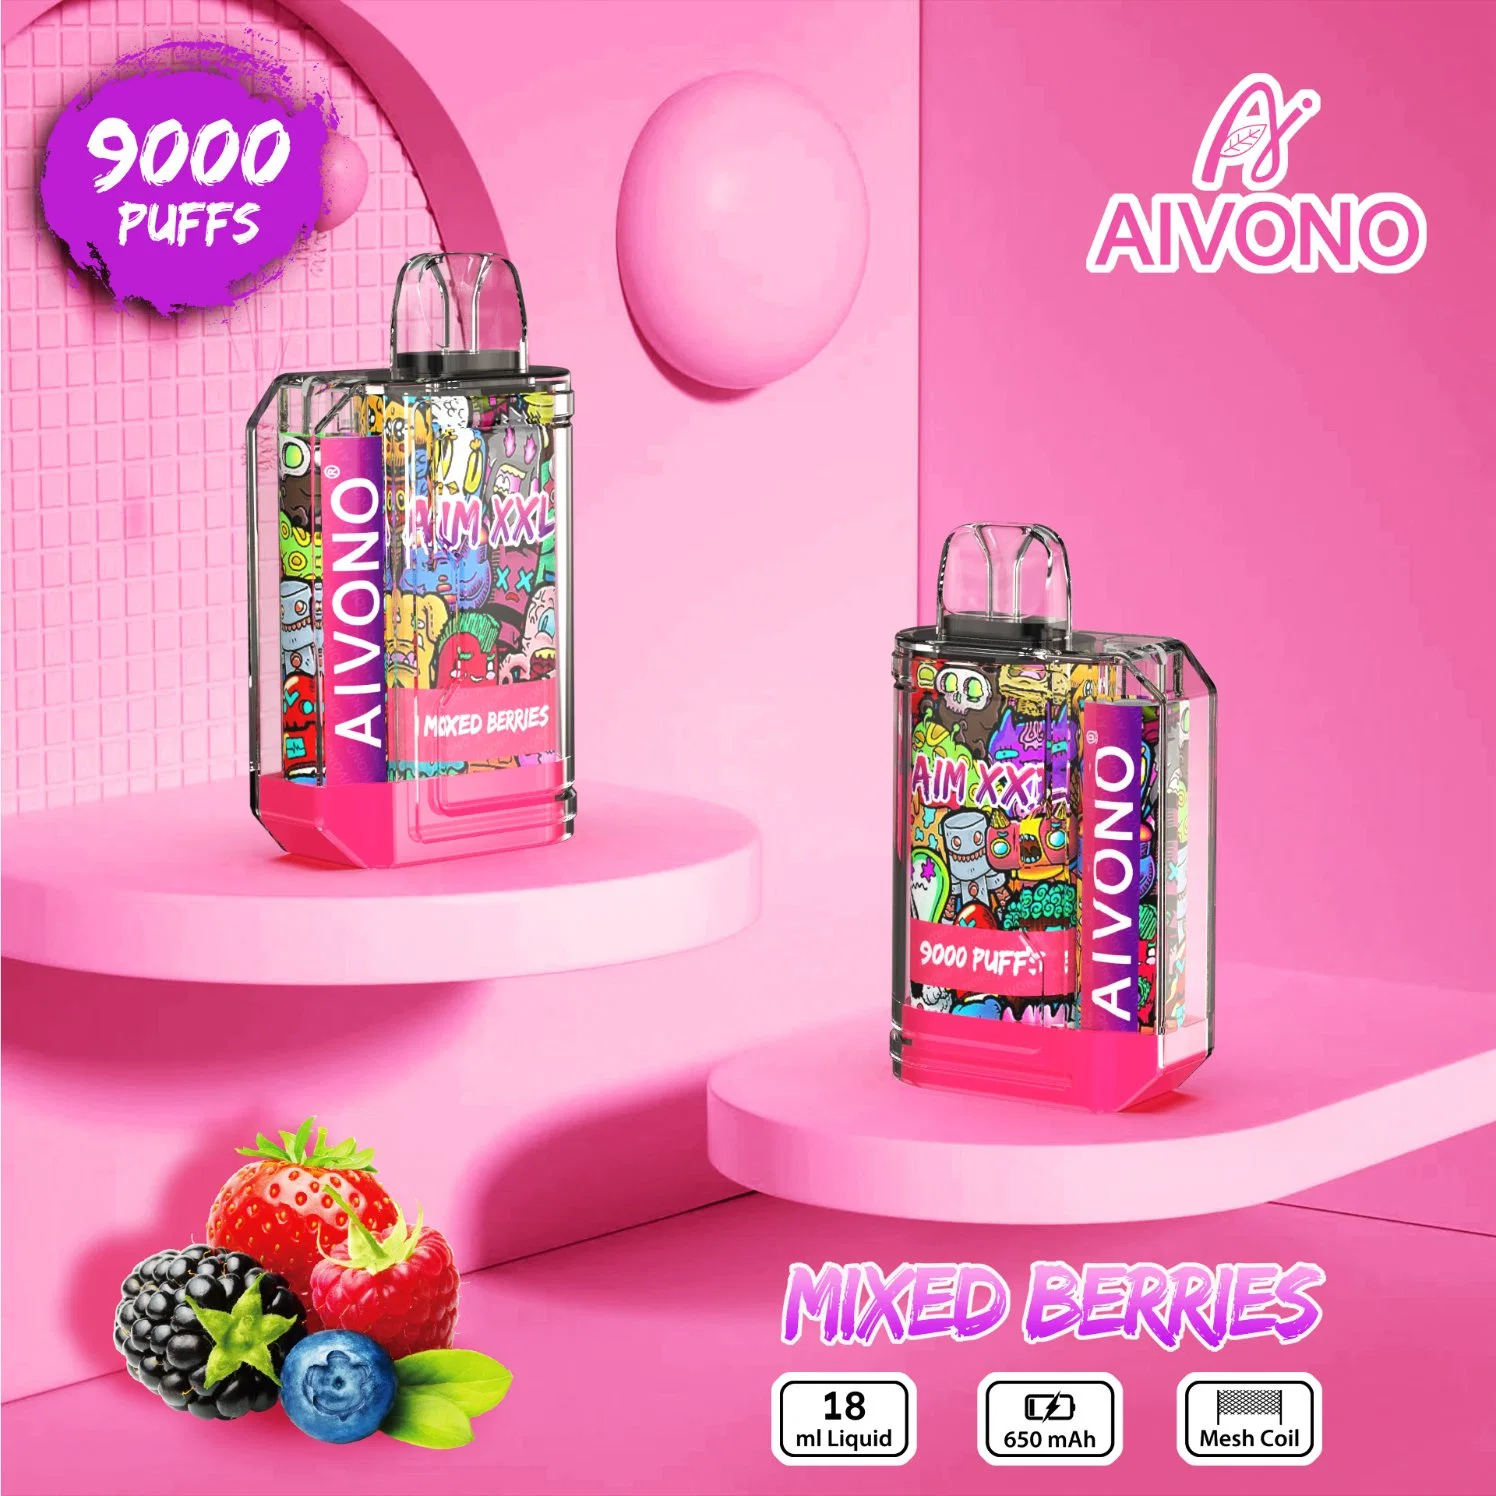 Aivono Aim XXL Best Selling Nicotine Salt E-Liquid Taste Flavors Chinese Supplier OEM Disposable/Chargeable Vape 9000puffs